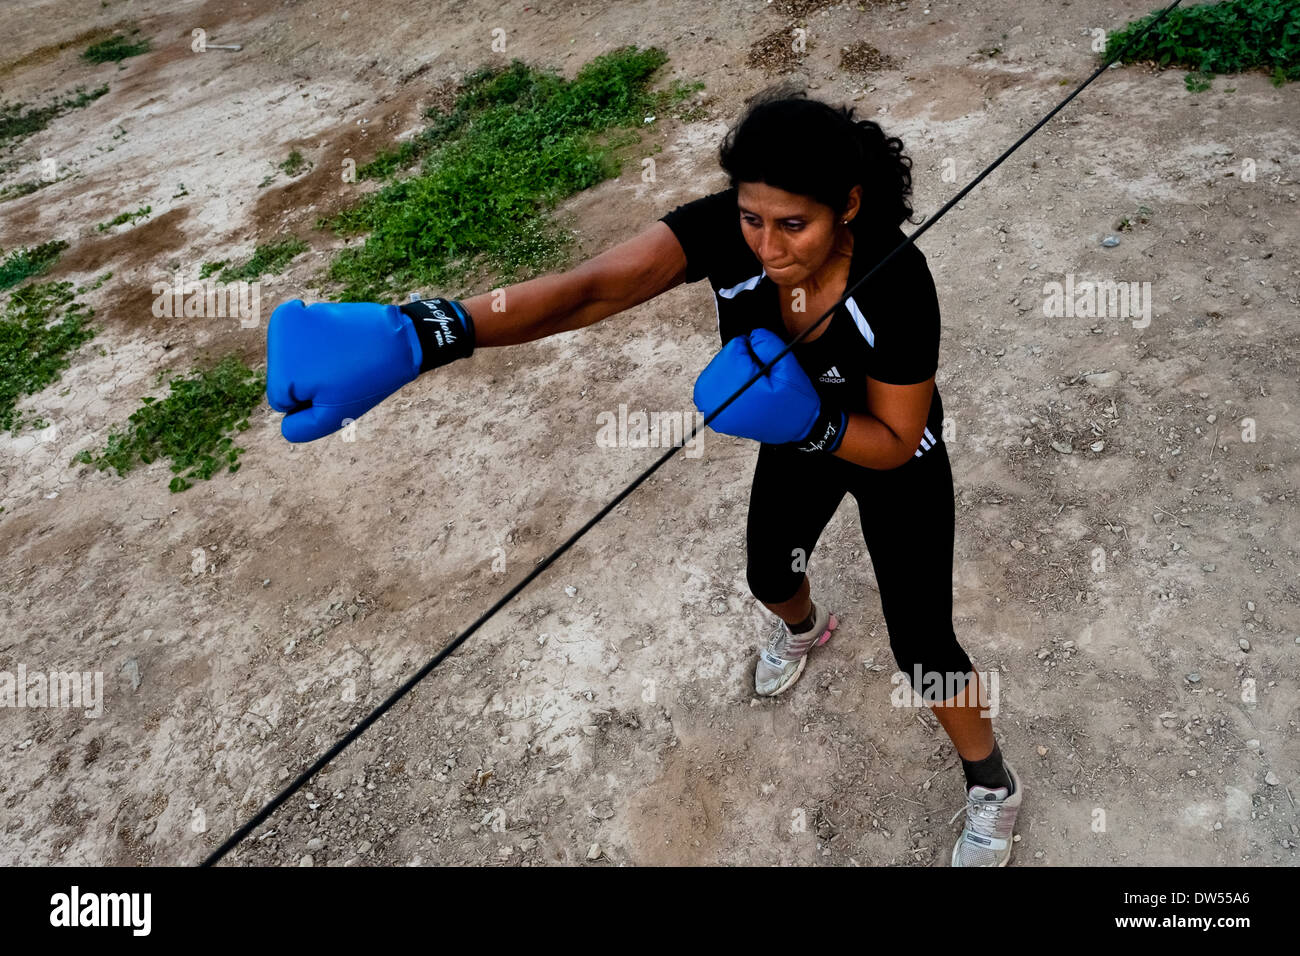 A Peruvian woman practices punching and movement while training in the outdoor boxing school in Callao, Peru. Stock Photo